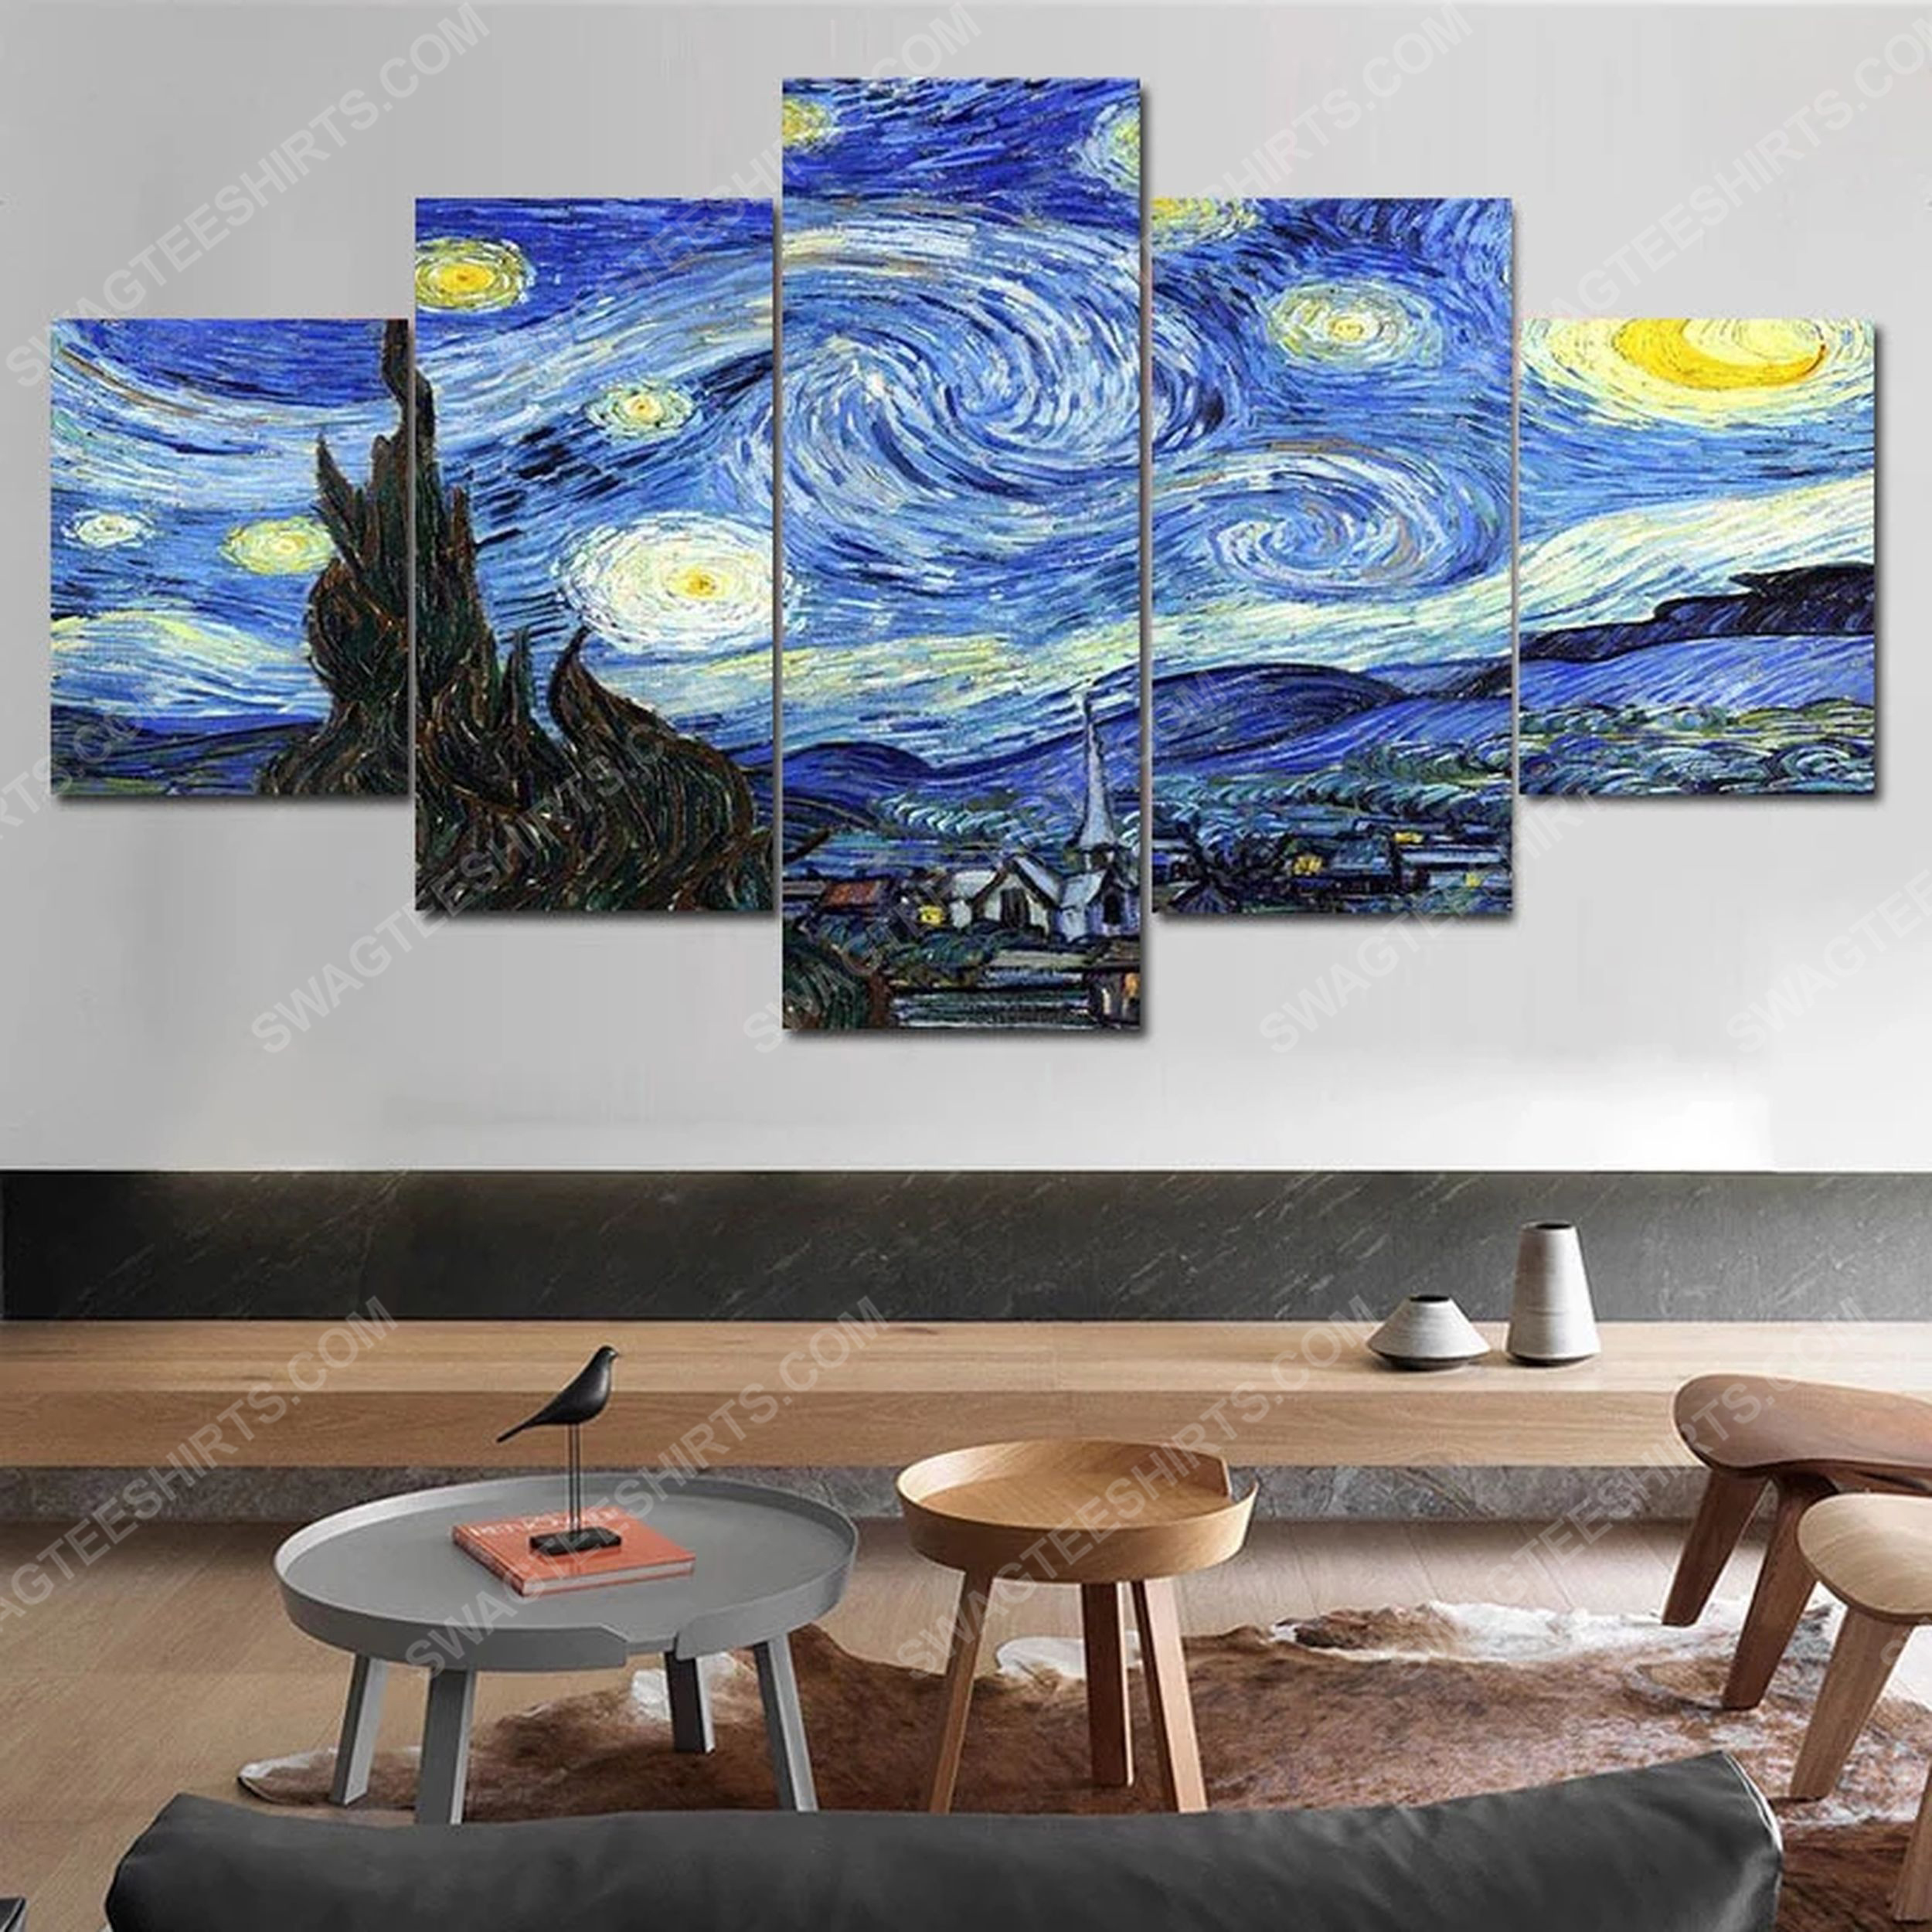 [special edition] Vincent van gogh starry night print painting canvas wall art home decor – maria